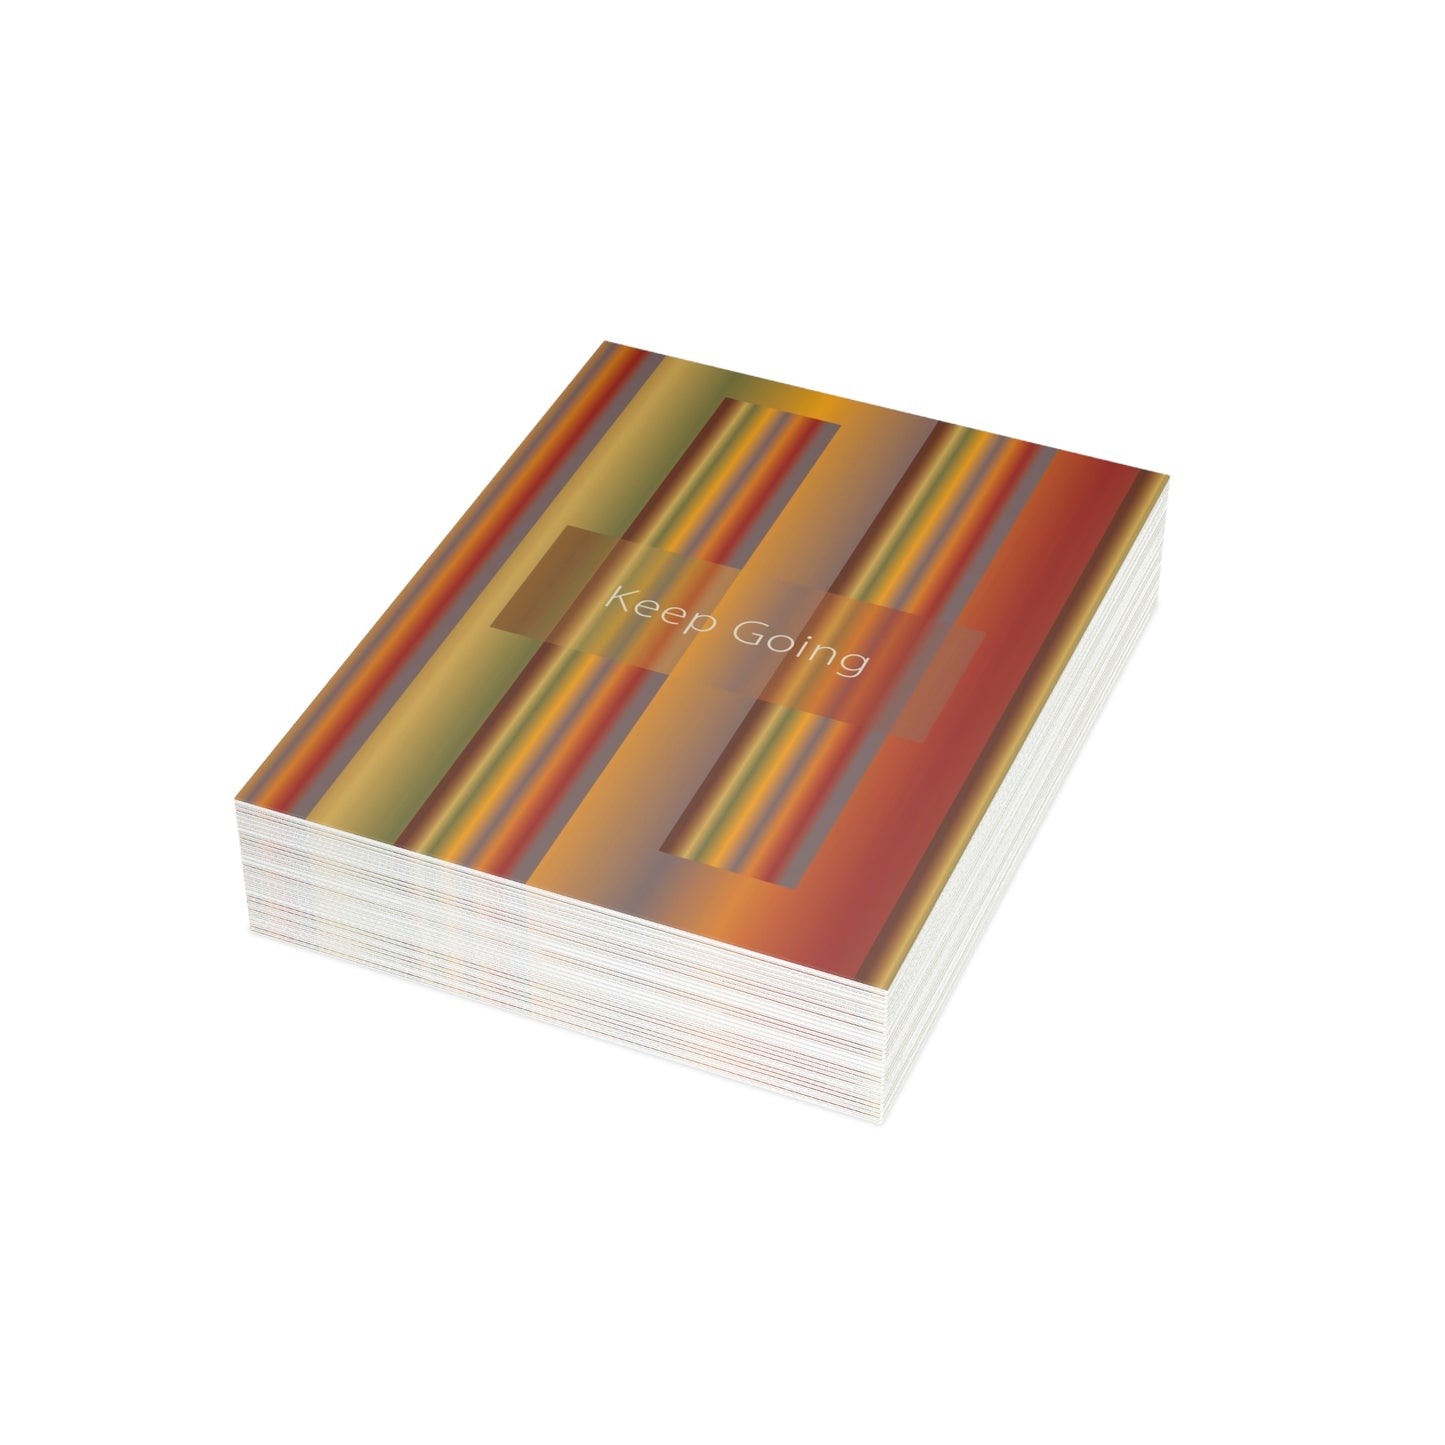 Folded Greeting Cards Vertical (1, 10, 30, and 50pcs) Keep Going - Design No.1700